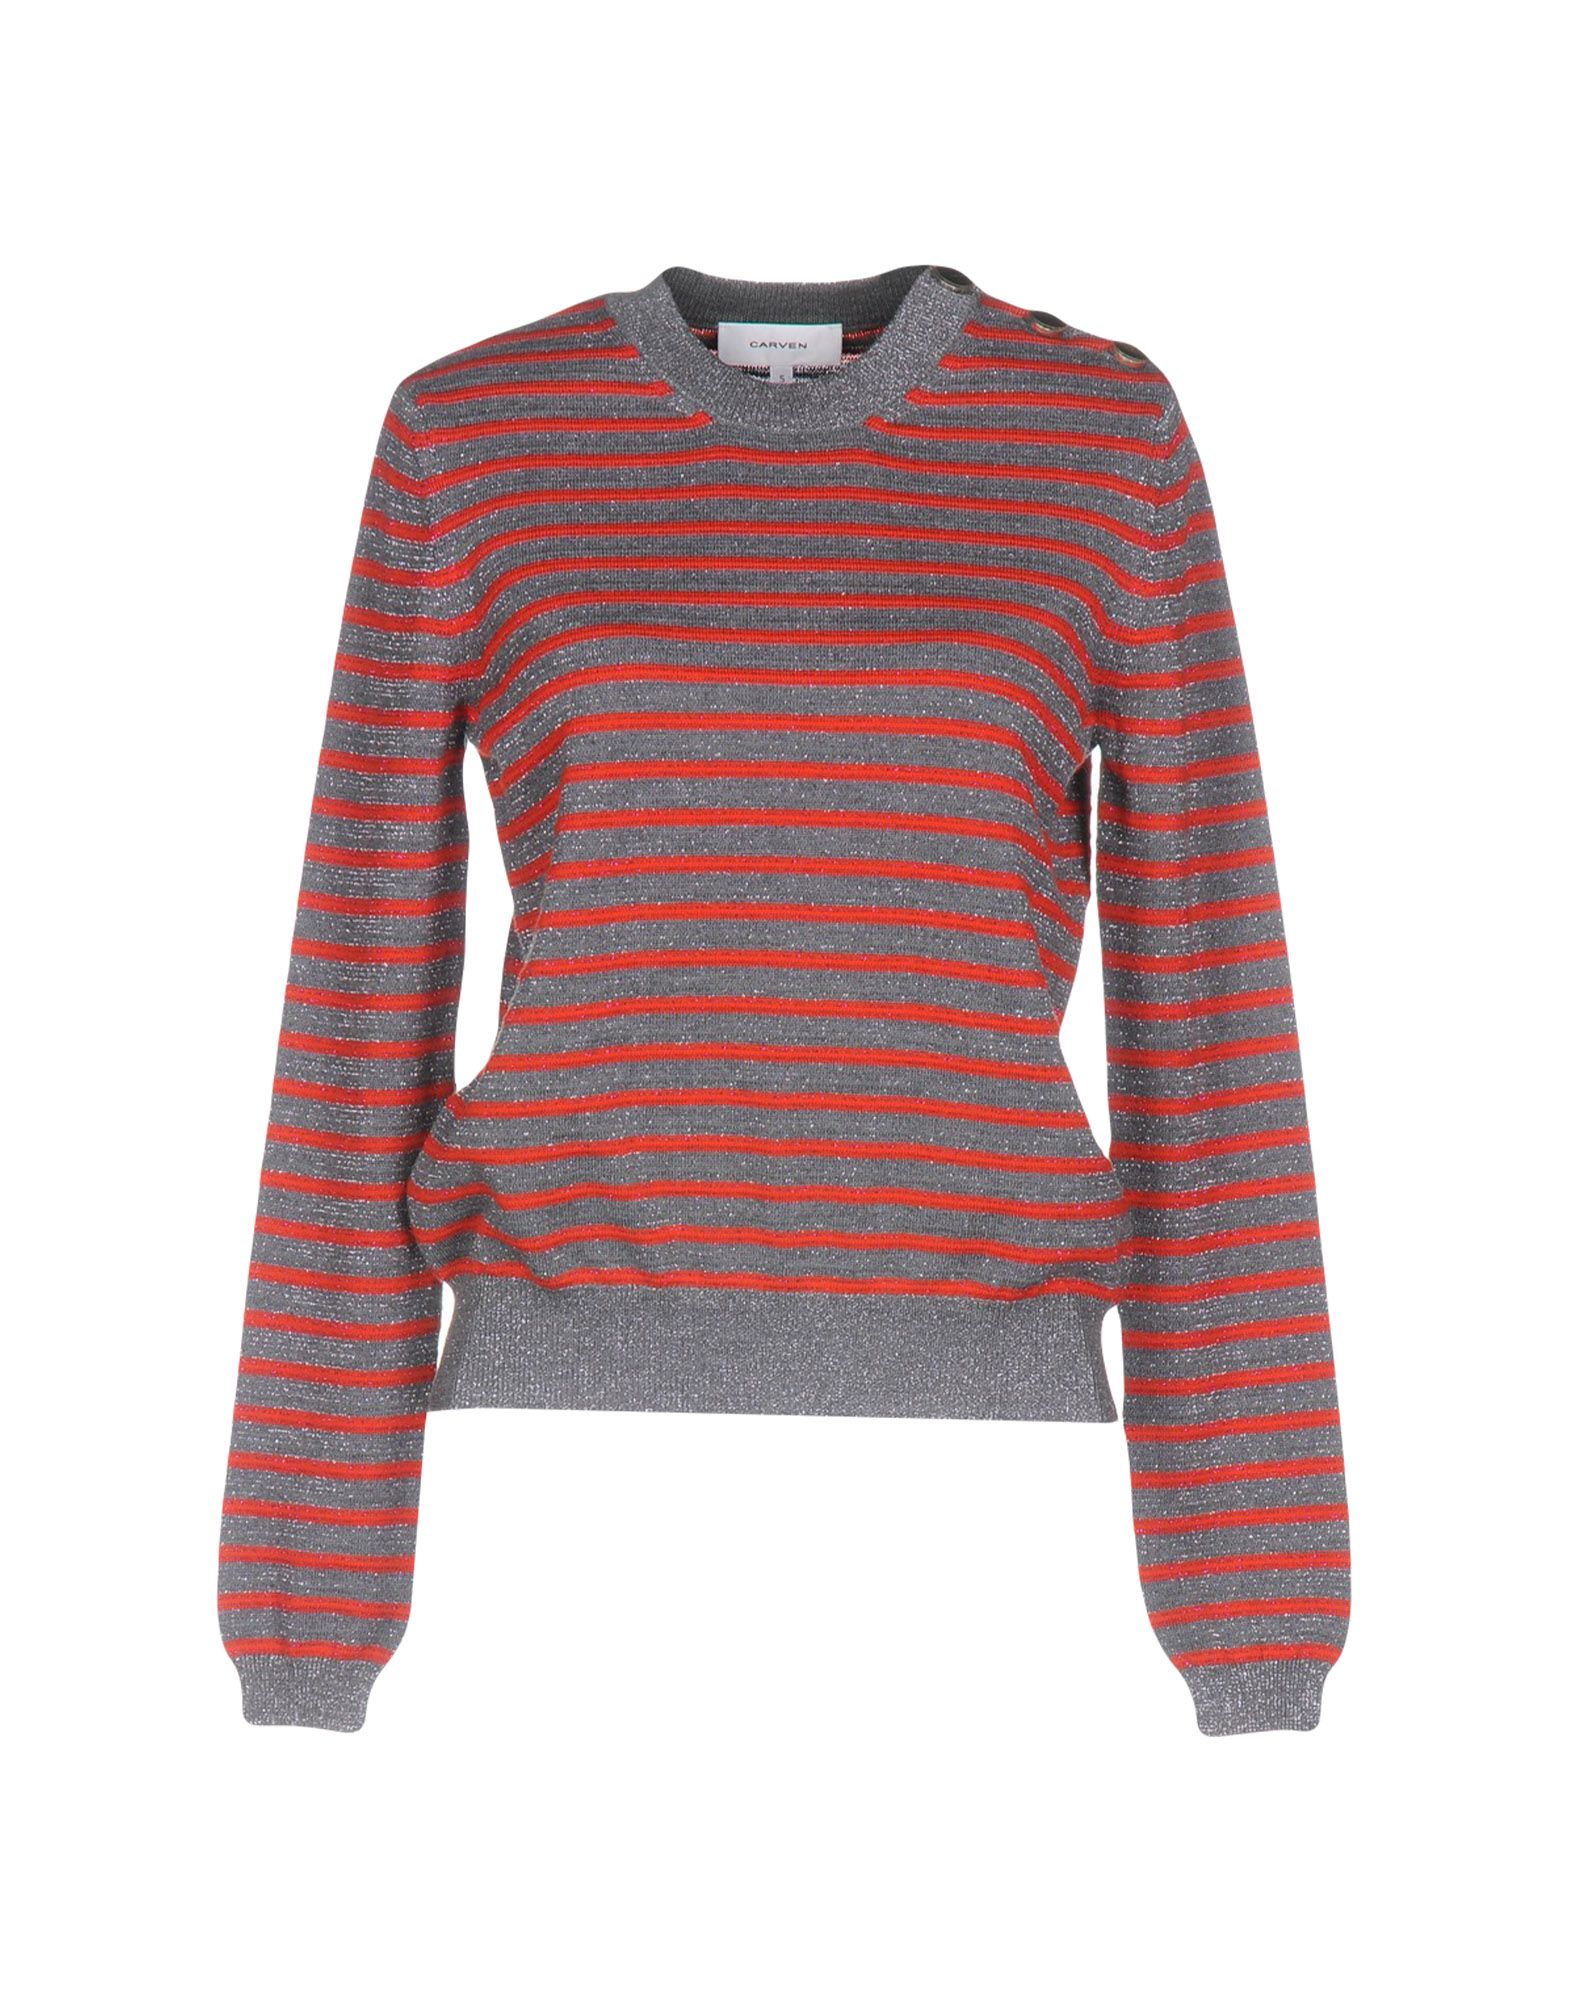 CARVEN SWEATER,39744523DH 4